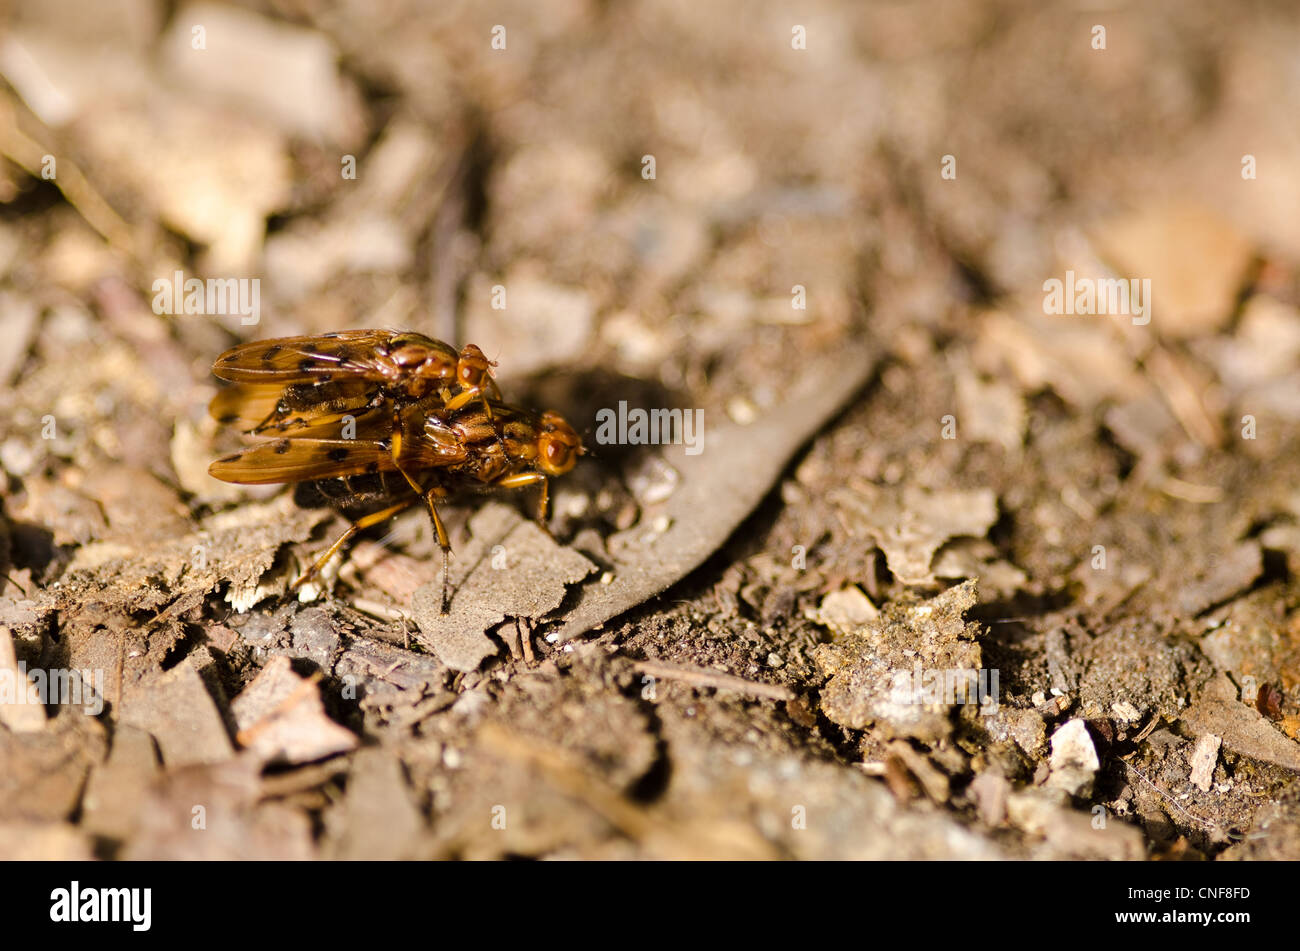 Two yellow brown japanese flies mating on a forest floor Stock Photo